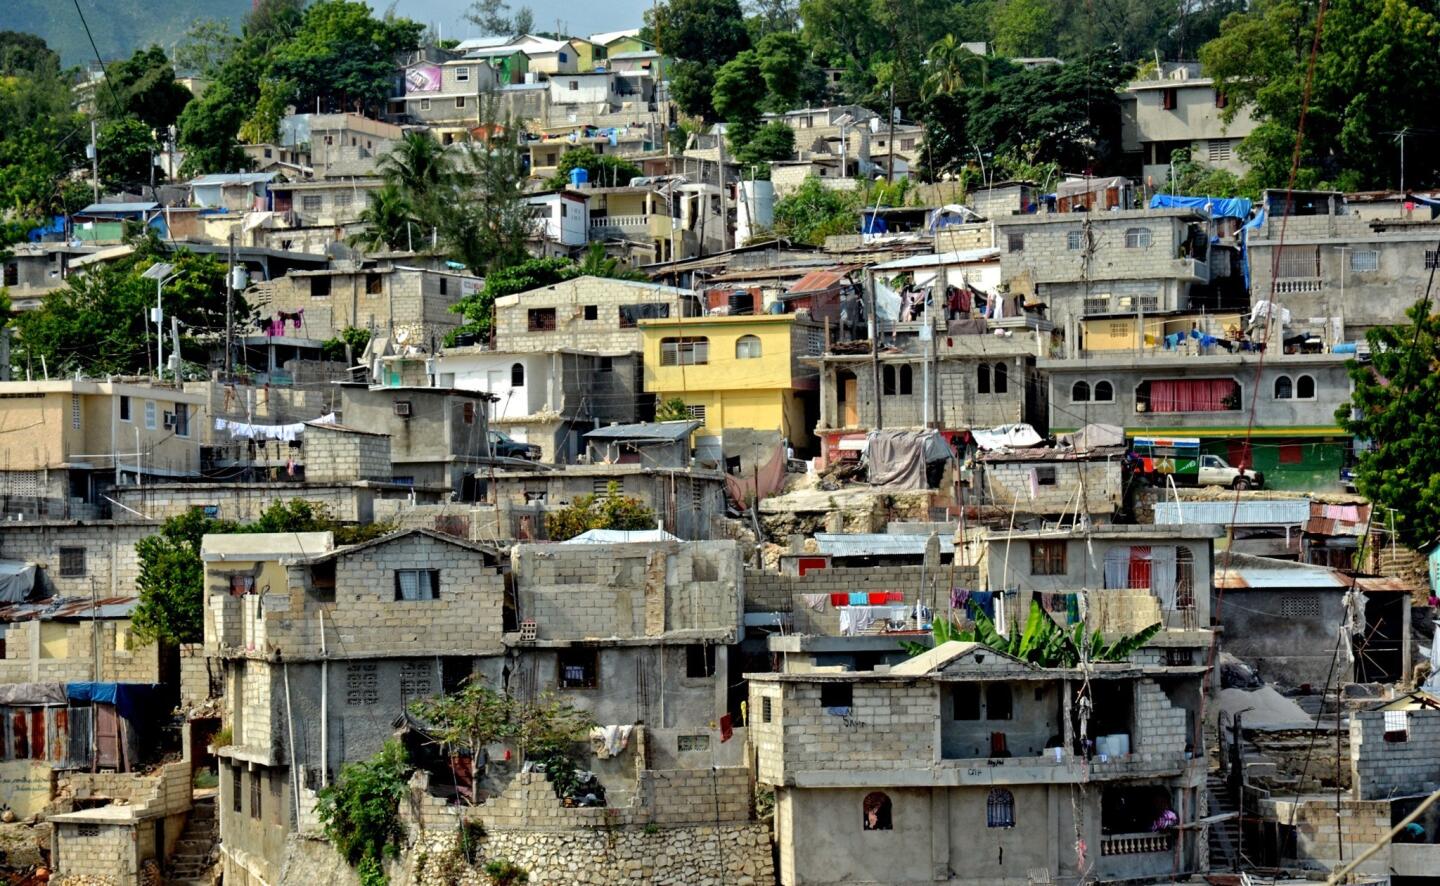 Petionville, one of the towns that makes up the sprawling metropolis of Port-au-Prince, is composed of narrow passages and stairs between concrete buildings that spill down the ubiquitous hills of Haiti before hitting bottom and starting the climb back up.